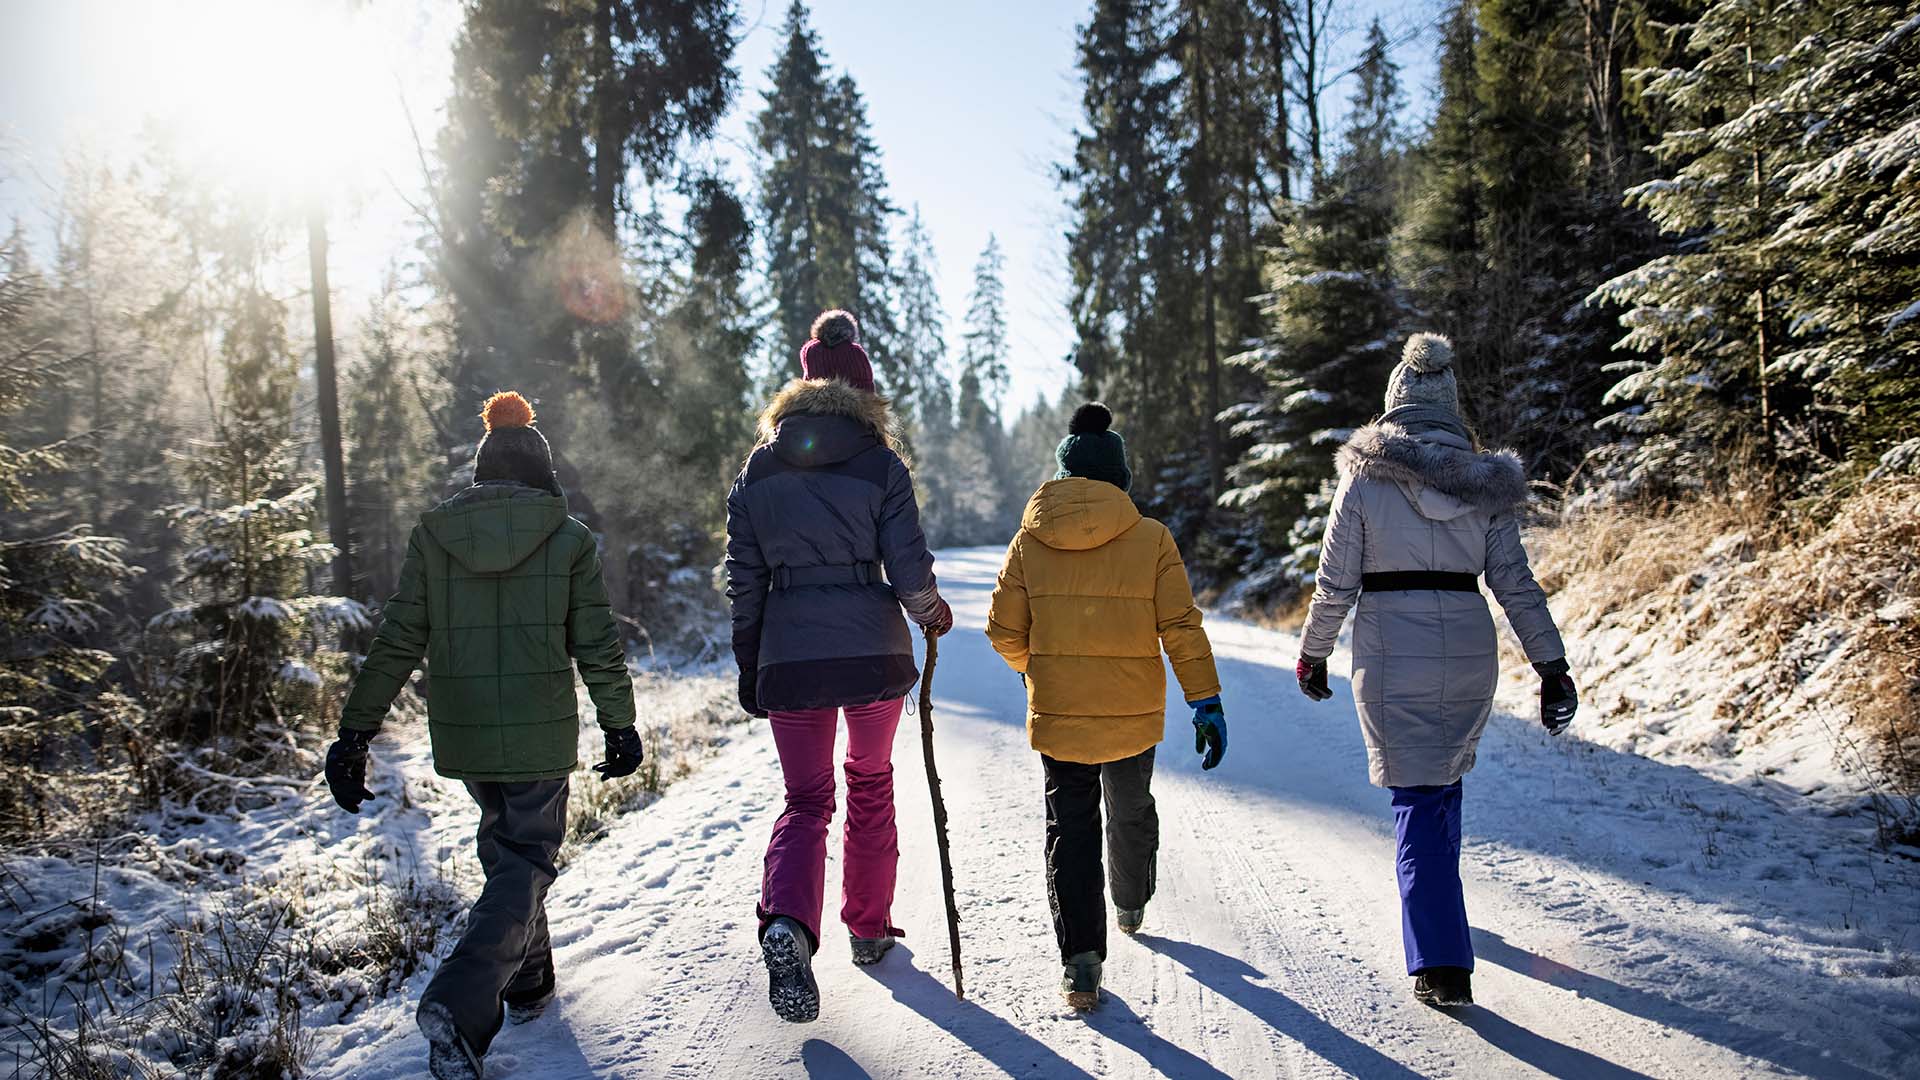 Four people, some adults, some children, walk on a snowy road in a line